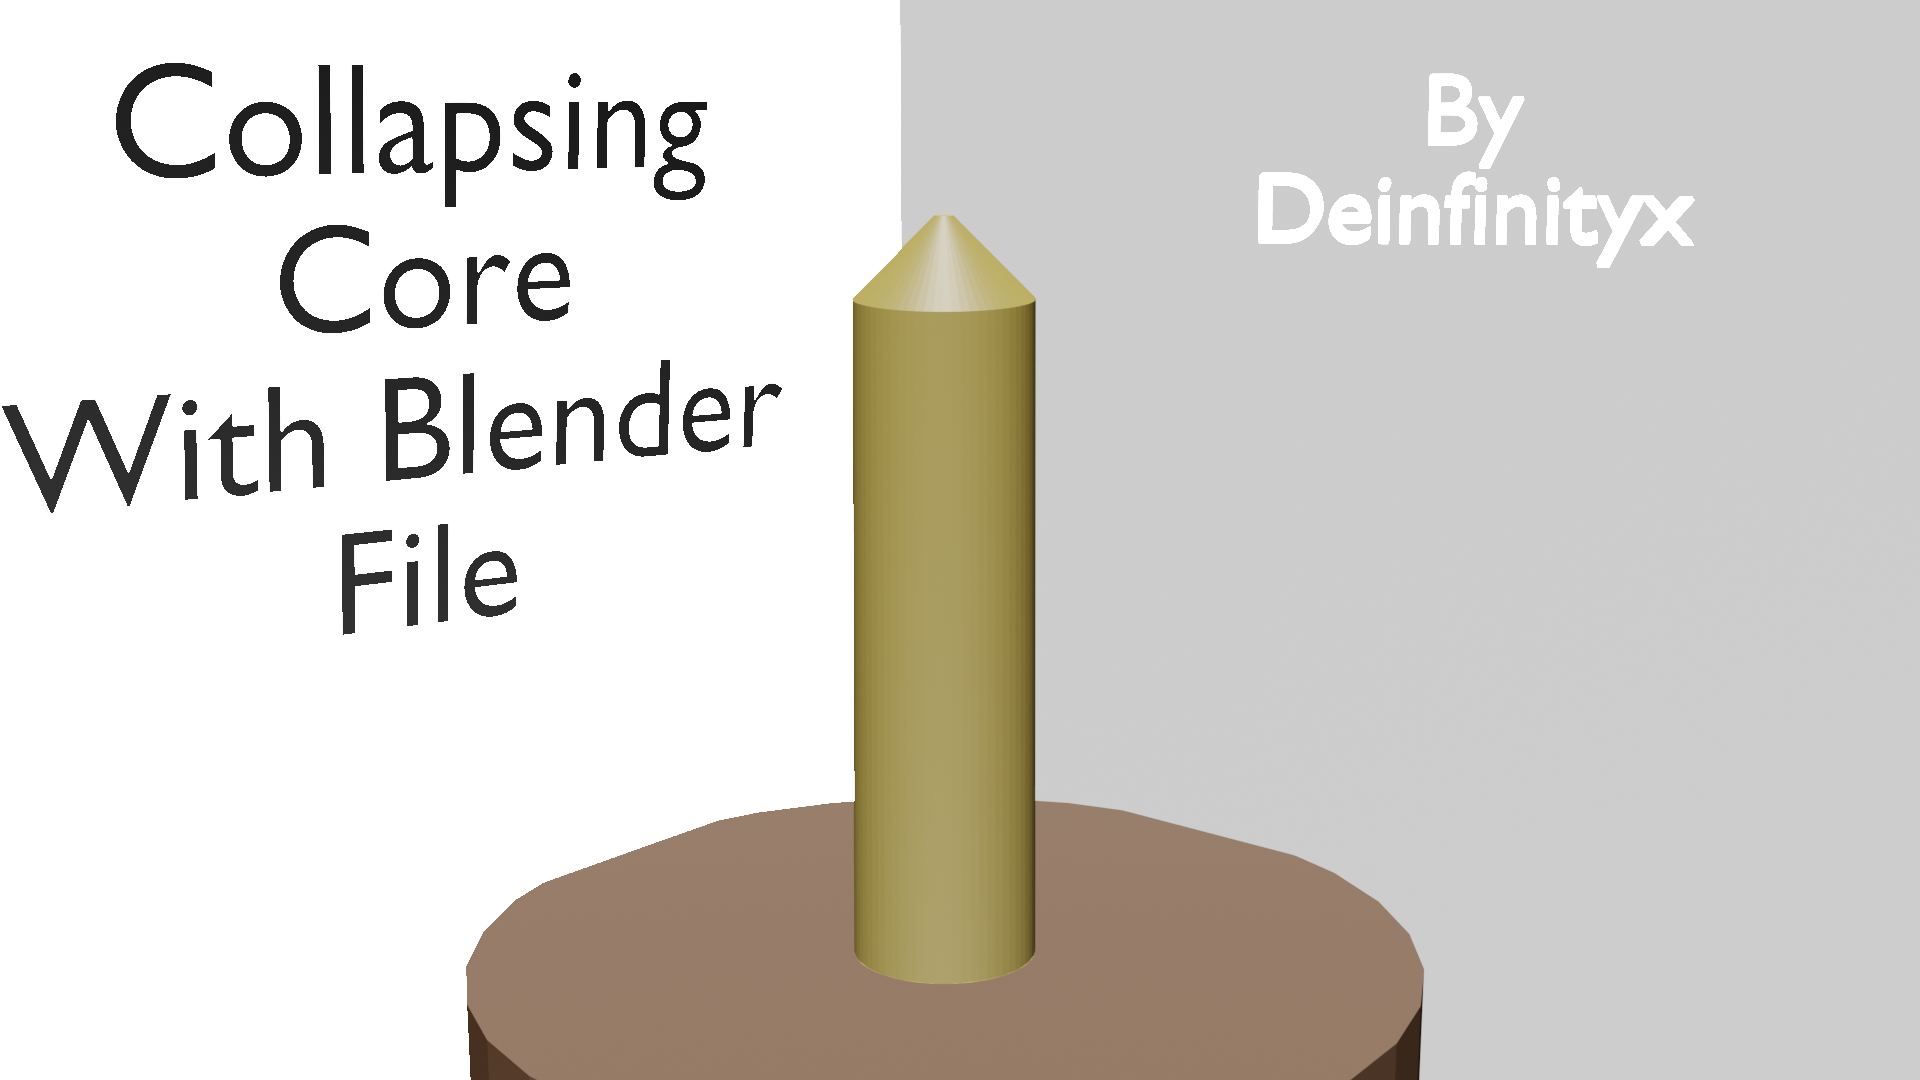 Collapsing Core with Blender file